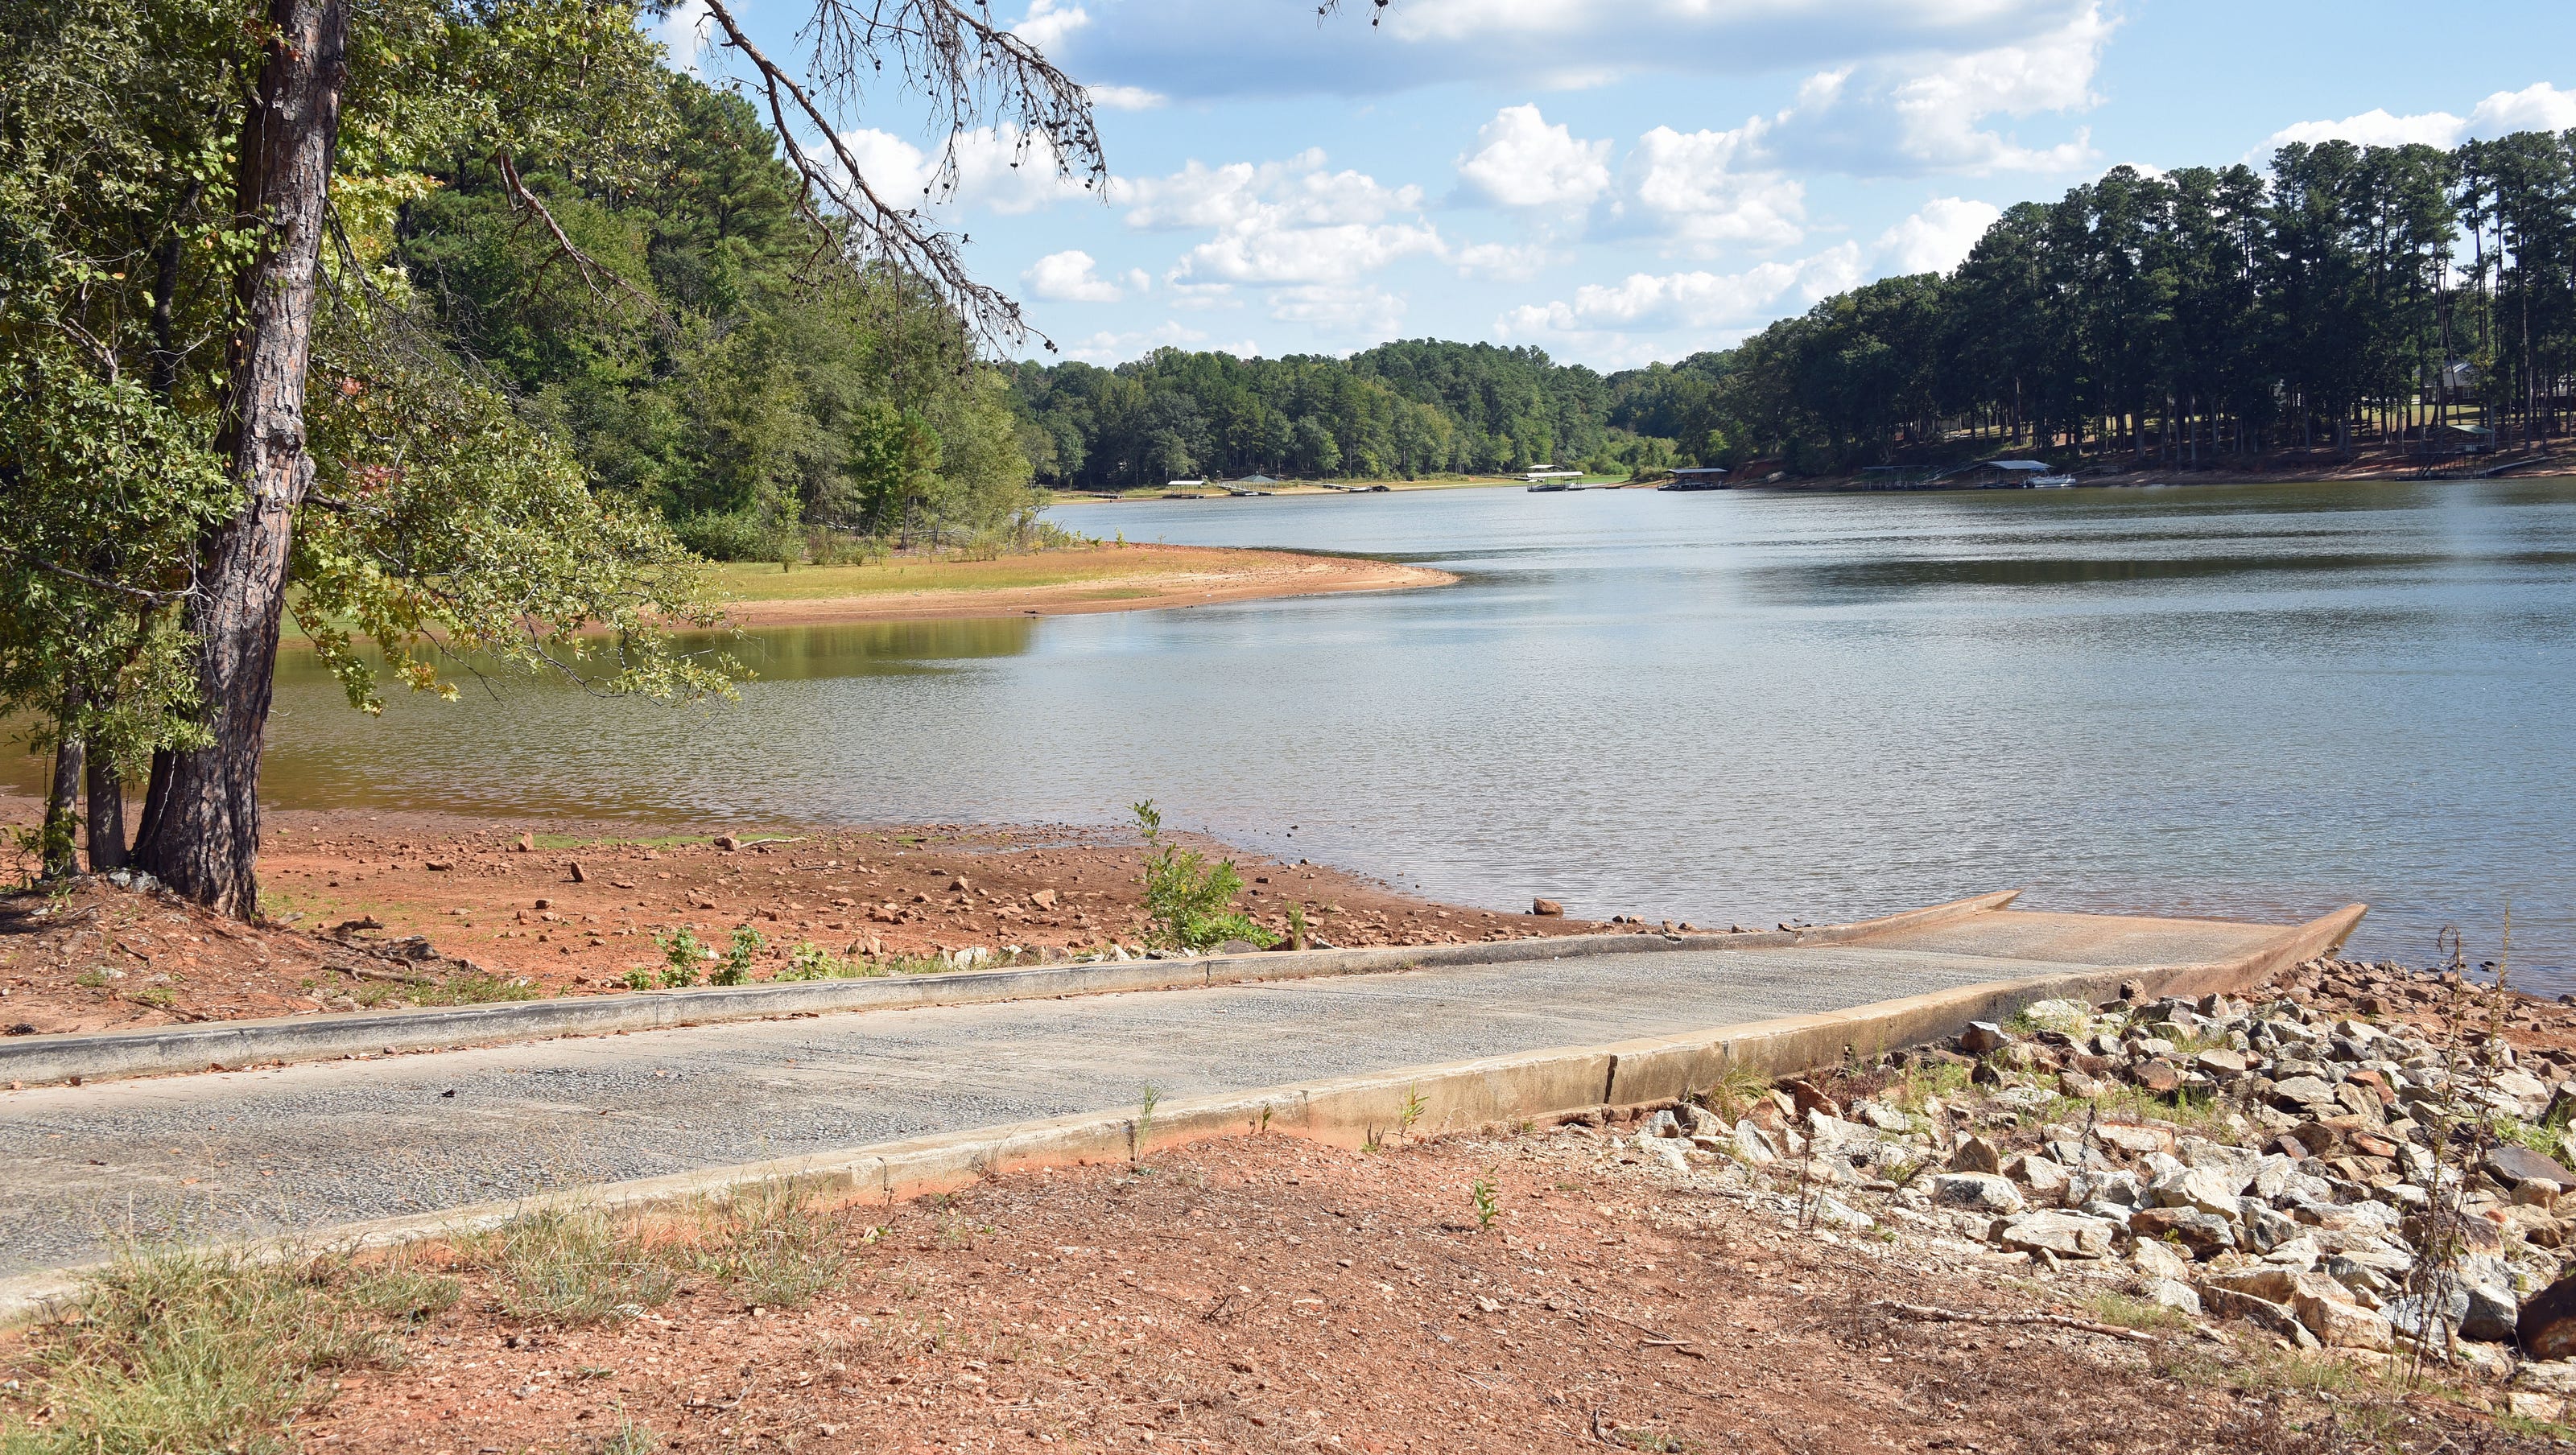 Corps slows flow from lakes as drought increases but Hartwell still